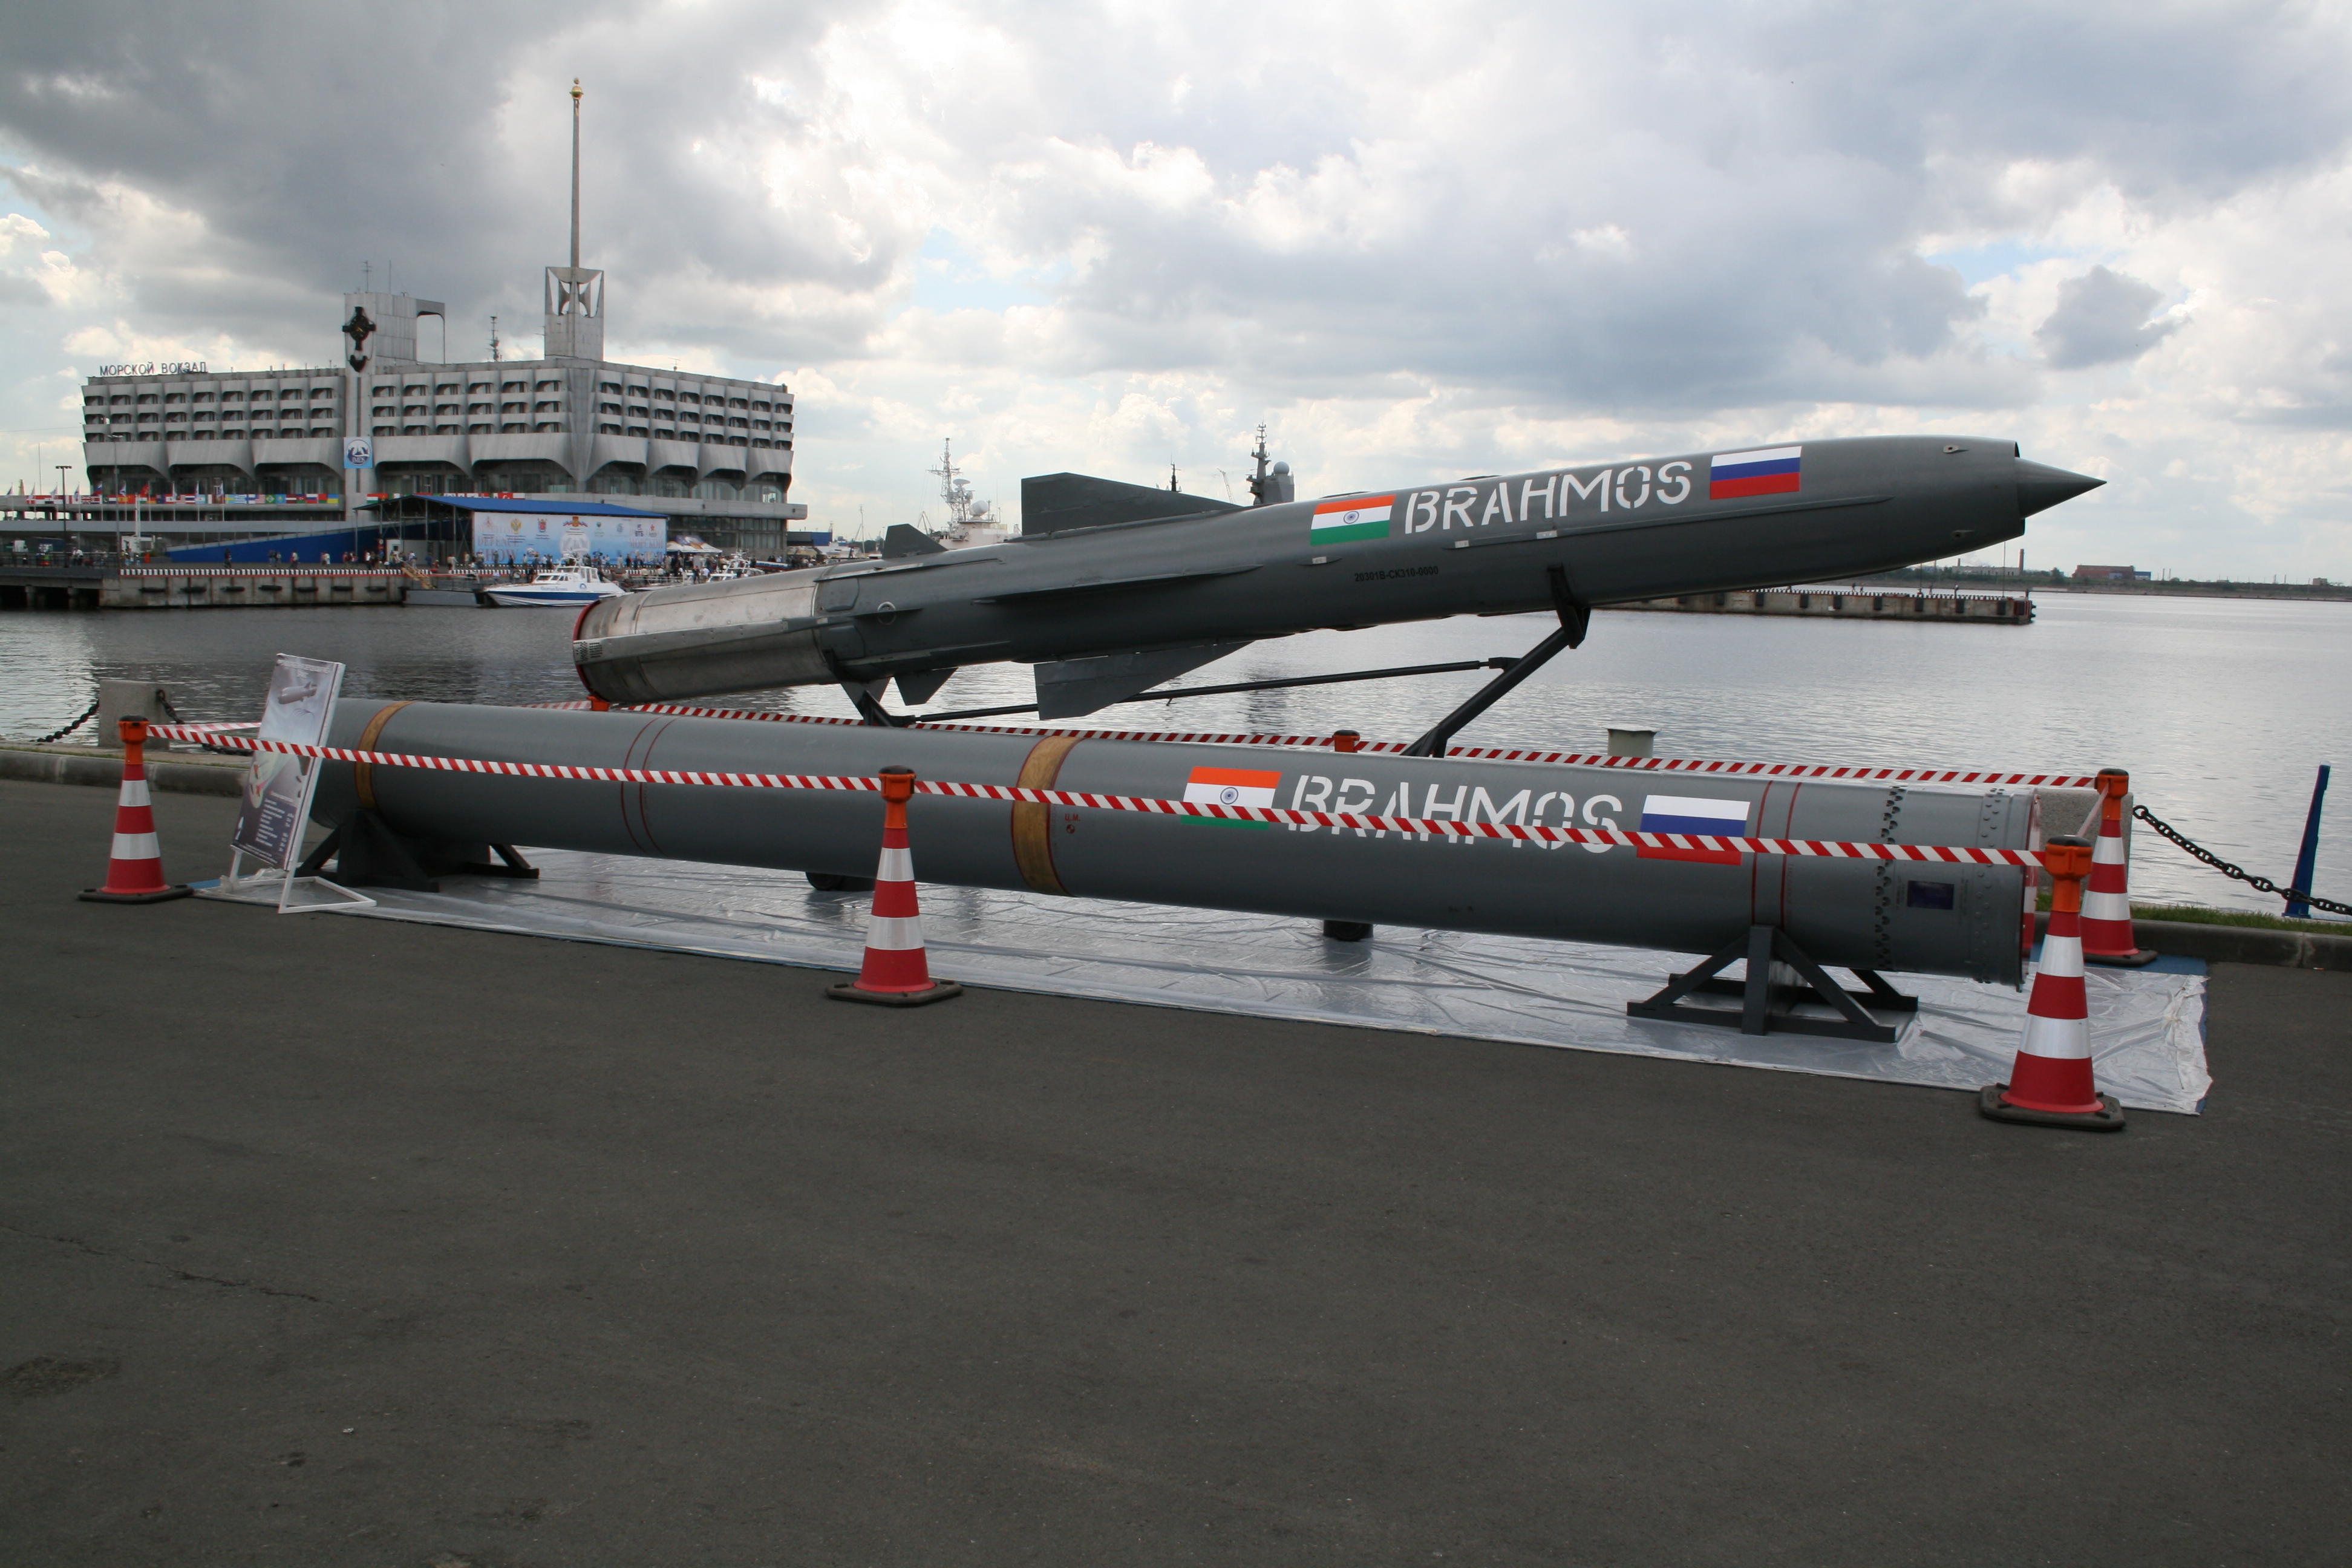 The BrahMos supersonic cruise missile, a product of a joint venture between Indian and Russian defense firms. Source: Wikipedia.